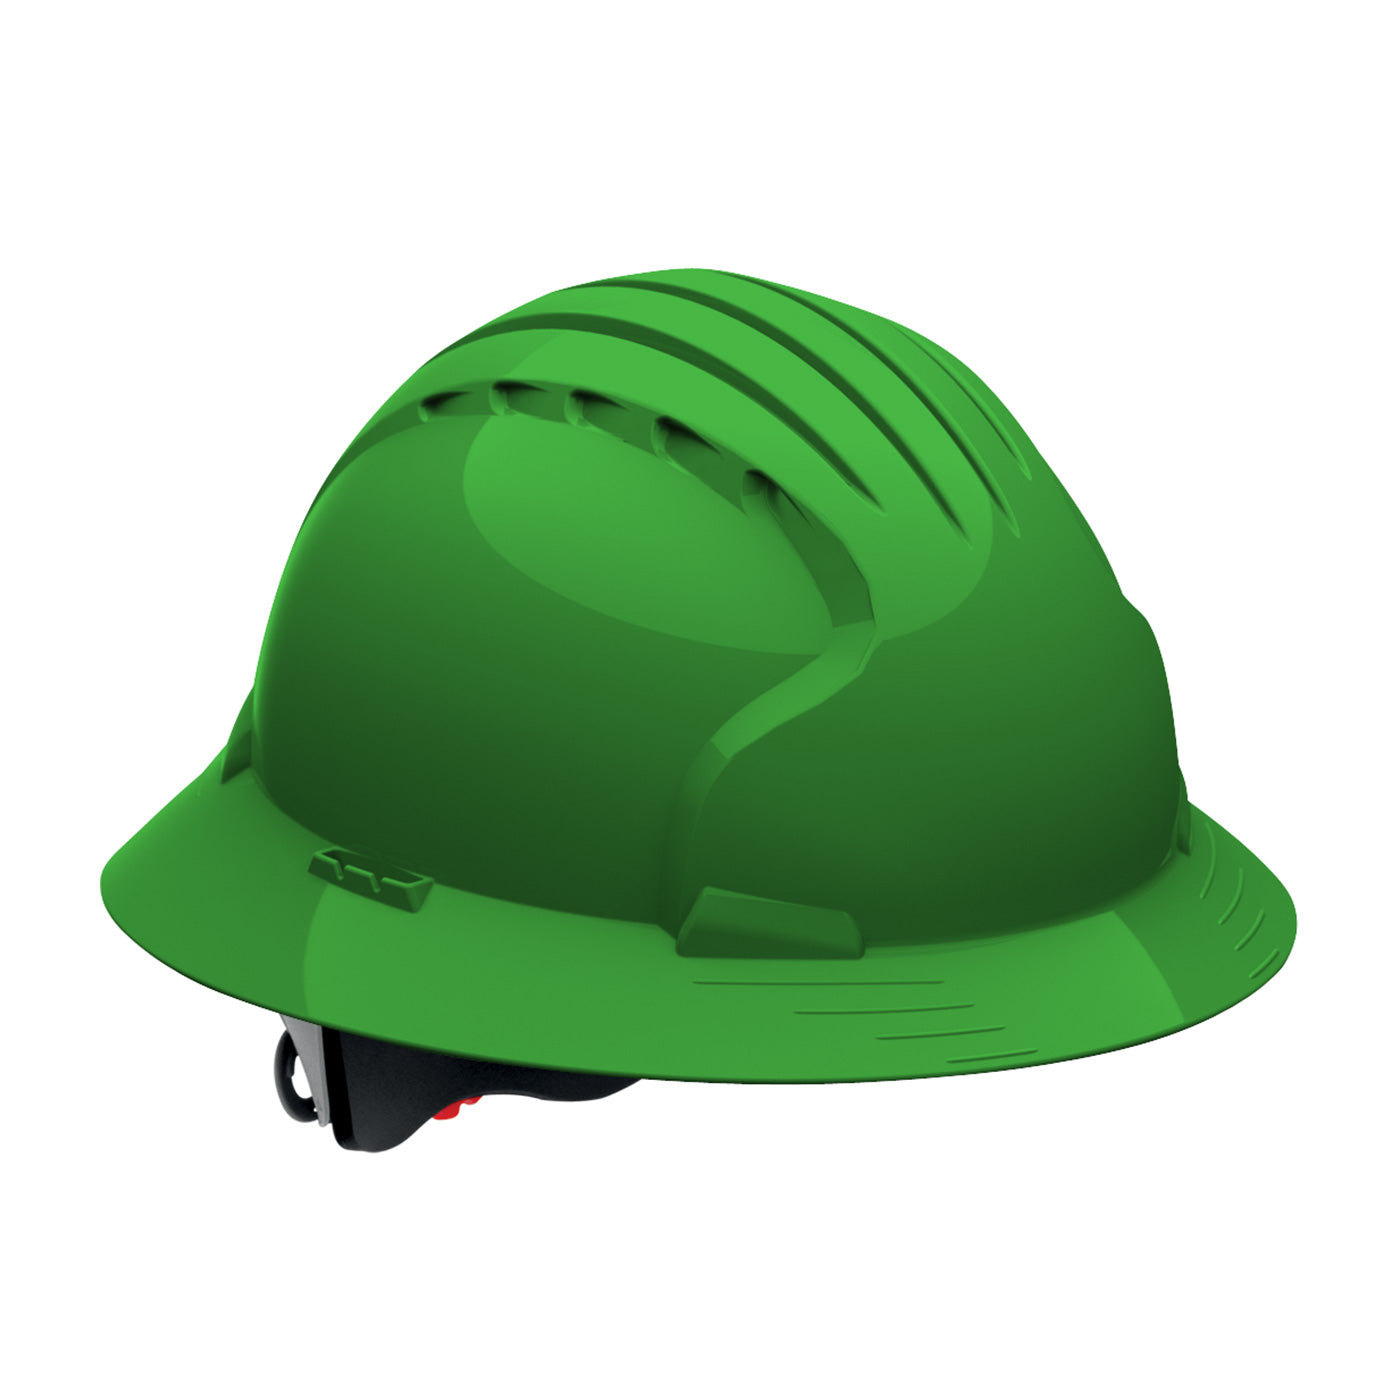 Evolution® Deluxe 6161 Full Brim Hard Hat with HDPE Shell, 6-Point Polyester Suspension and Wheel Ratchet Adjustment